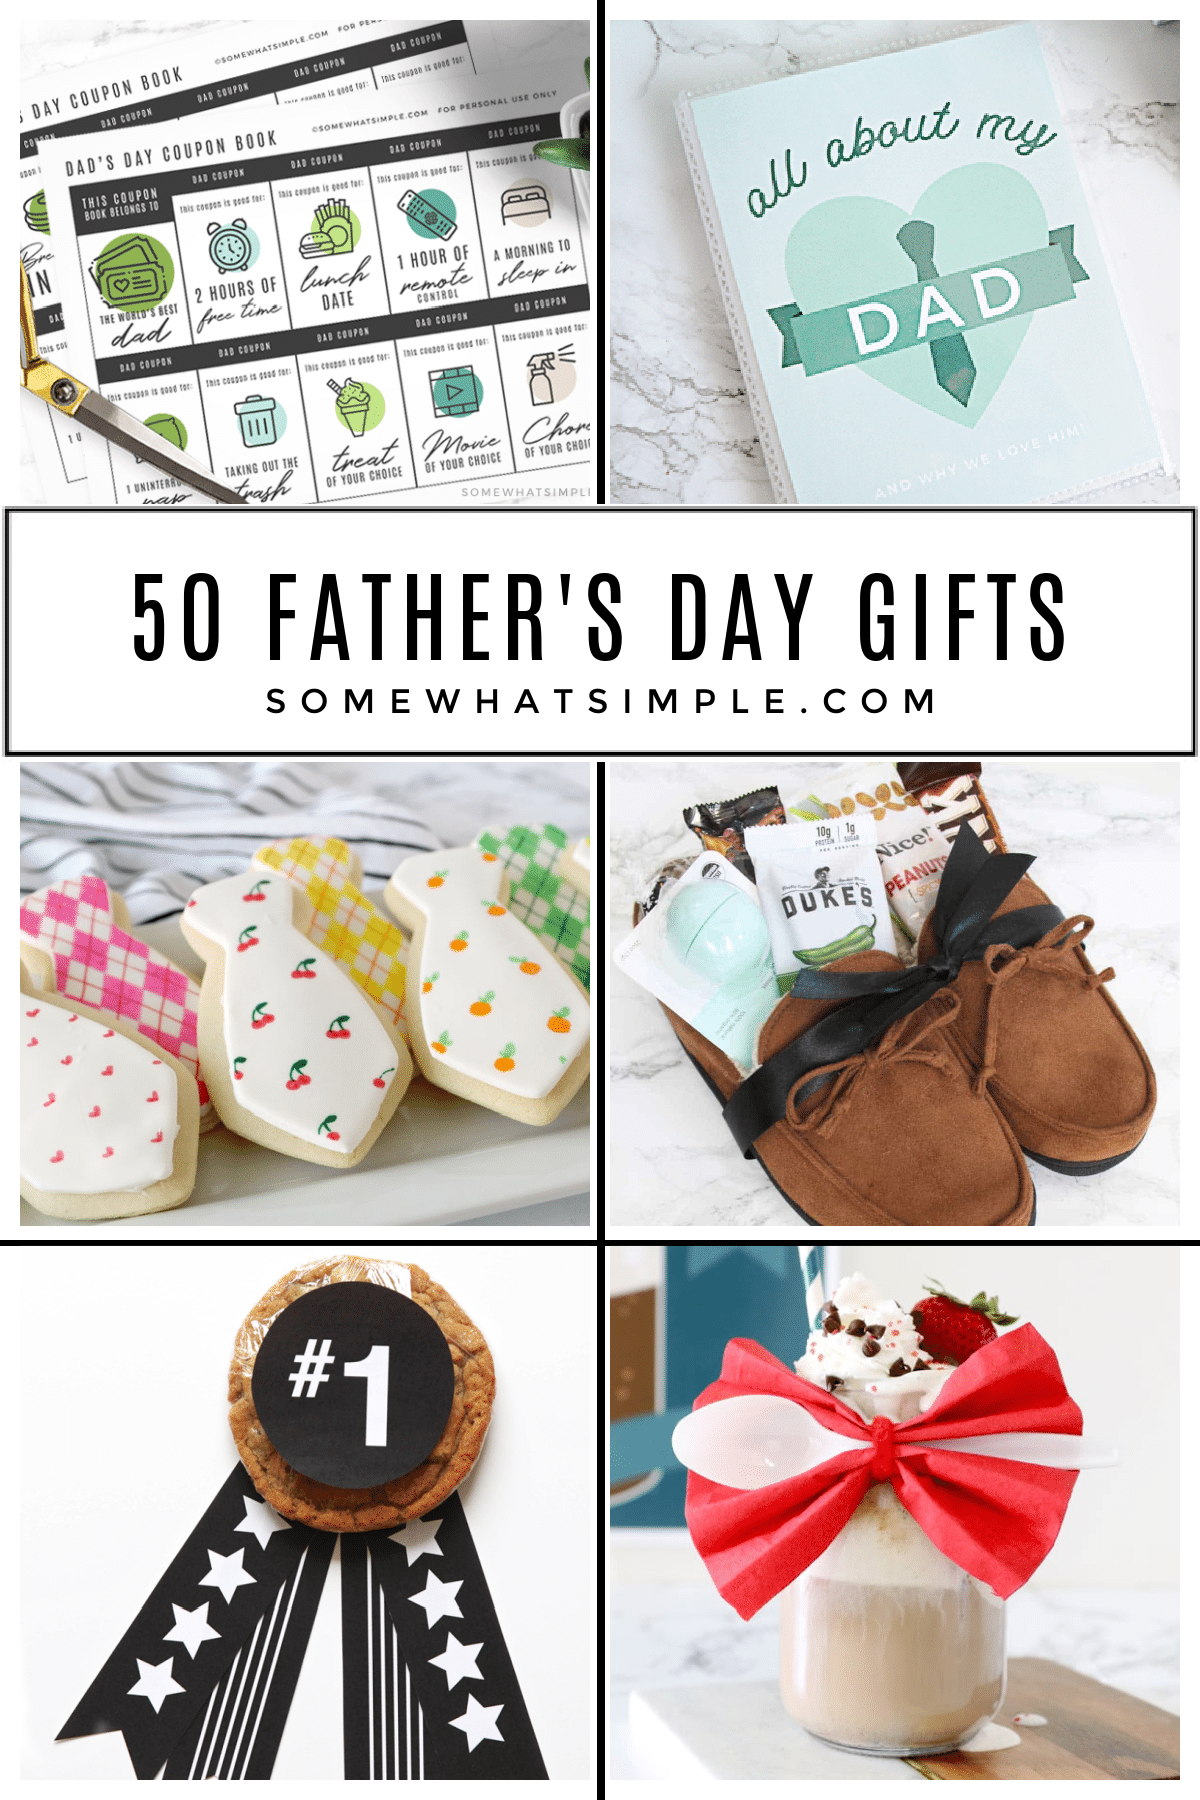 https://www.somewhatsimple.com/wp-content/uploads/2022/04/50-Fathers-Day-Gifts.png